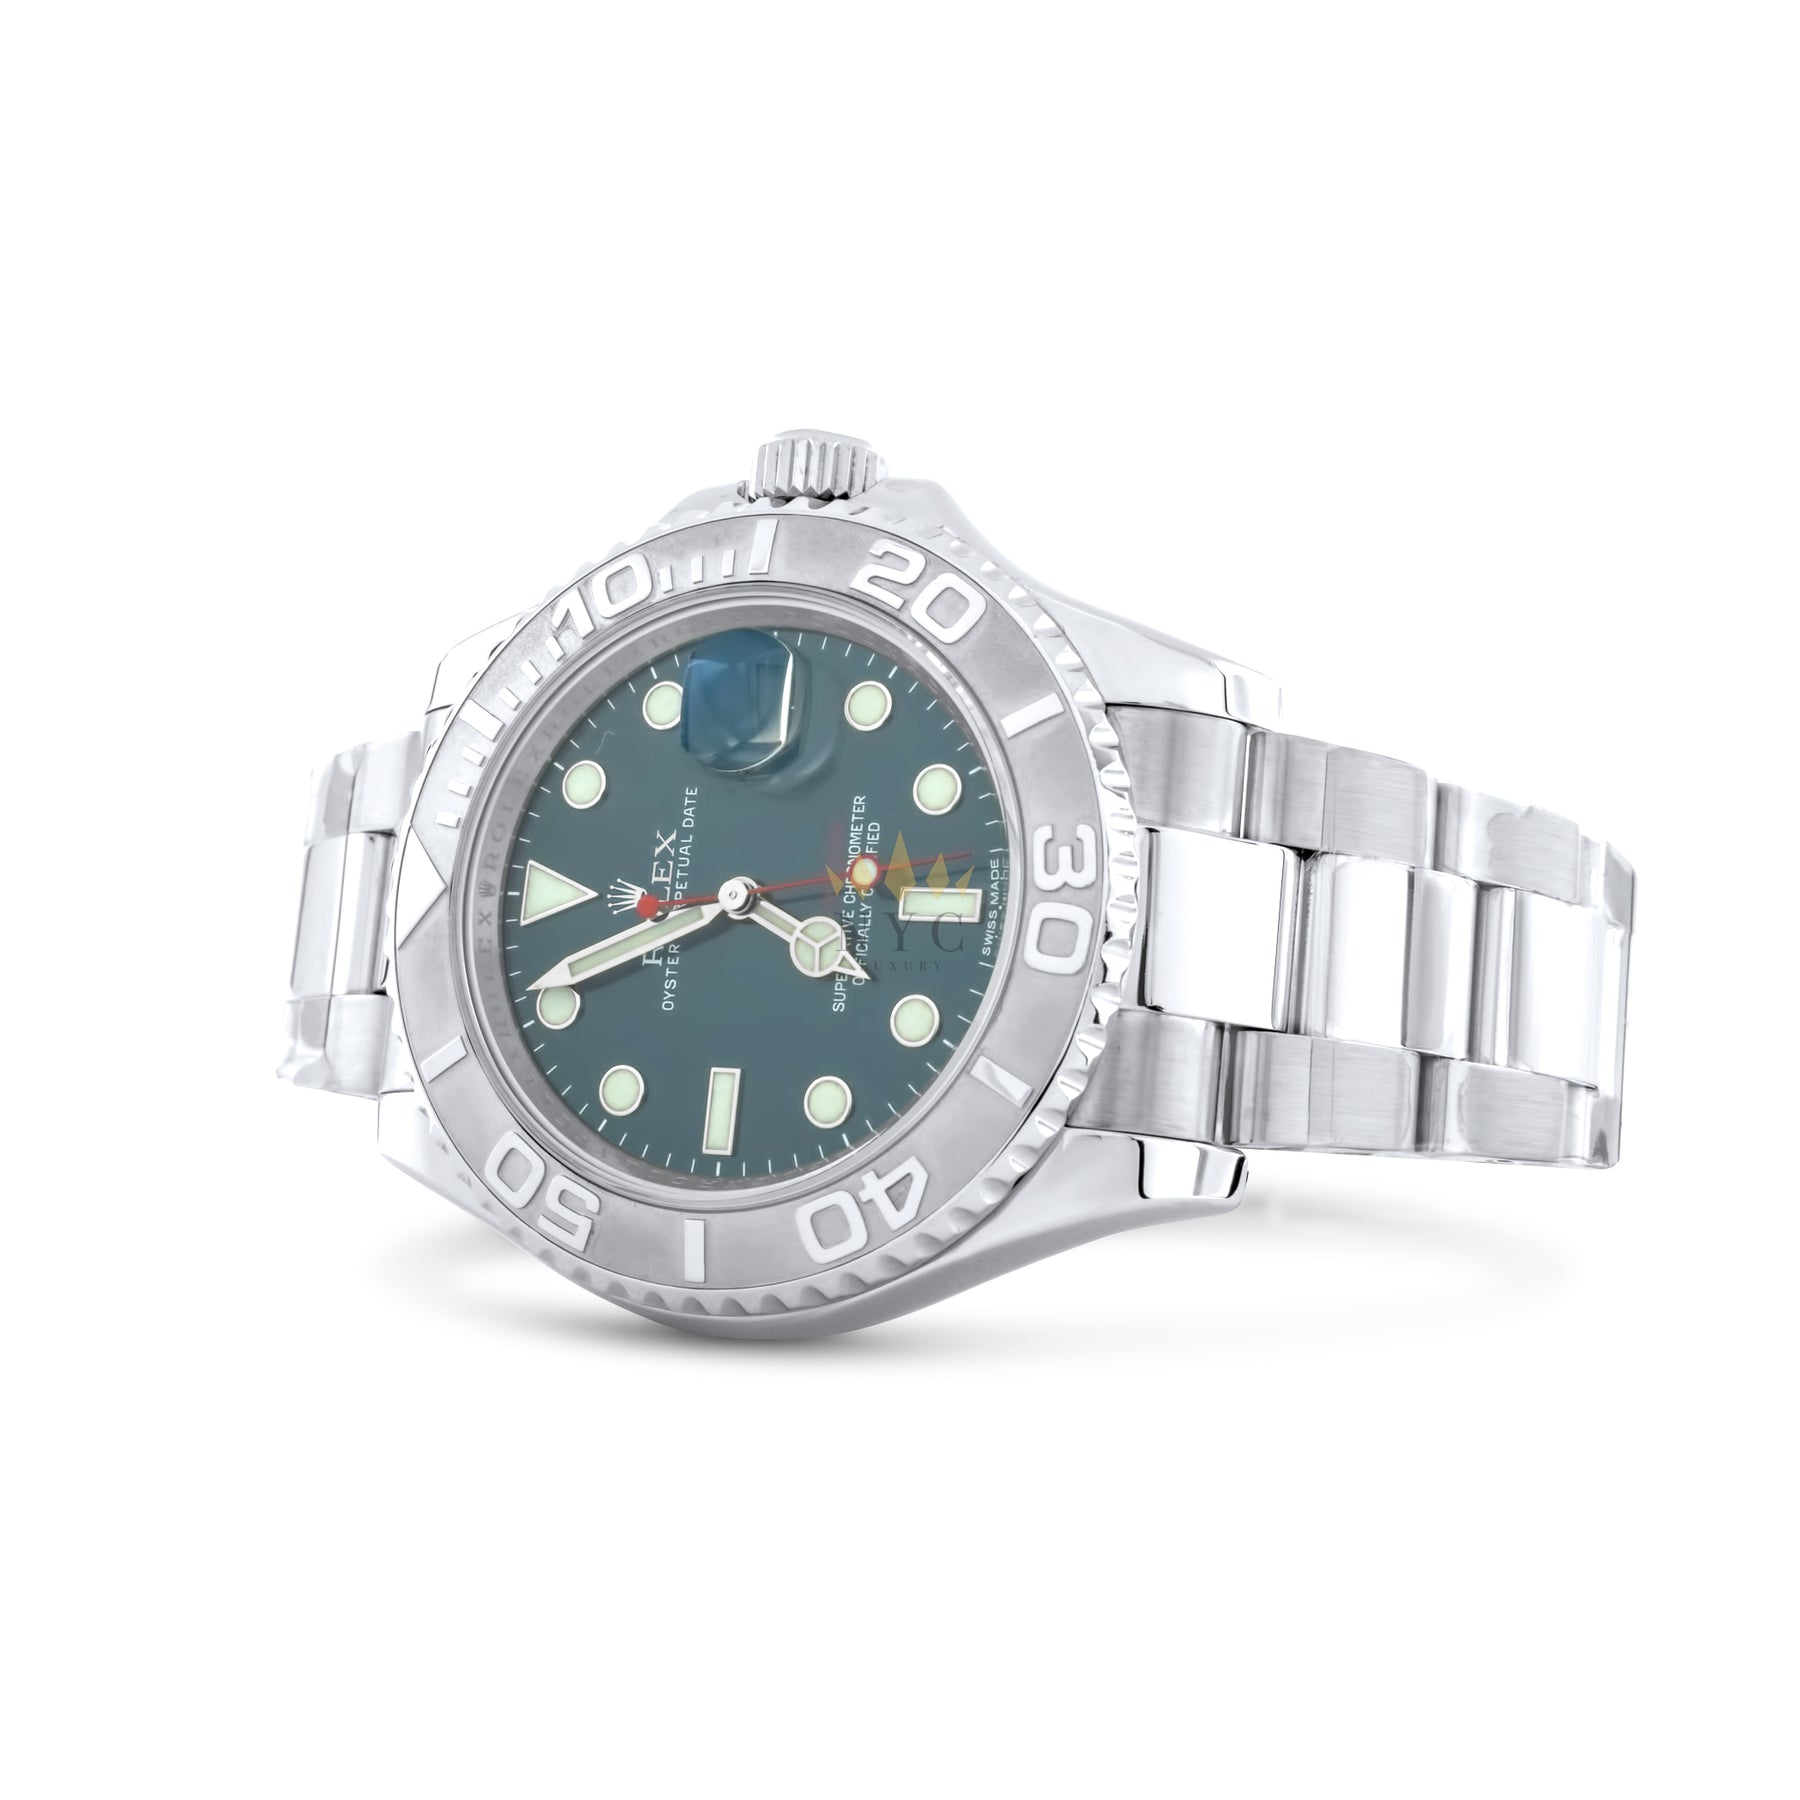 I picked up this beautiful Rolex Yacht Master blue dial from my